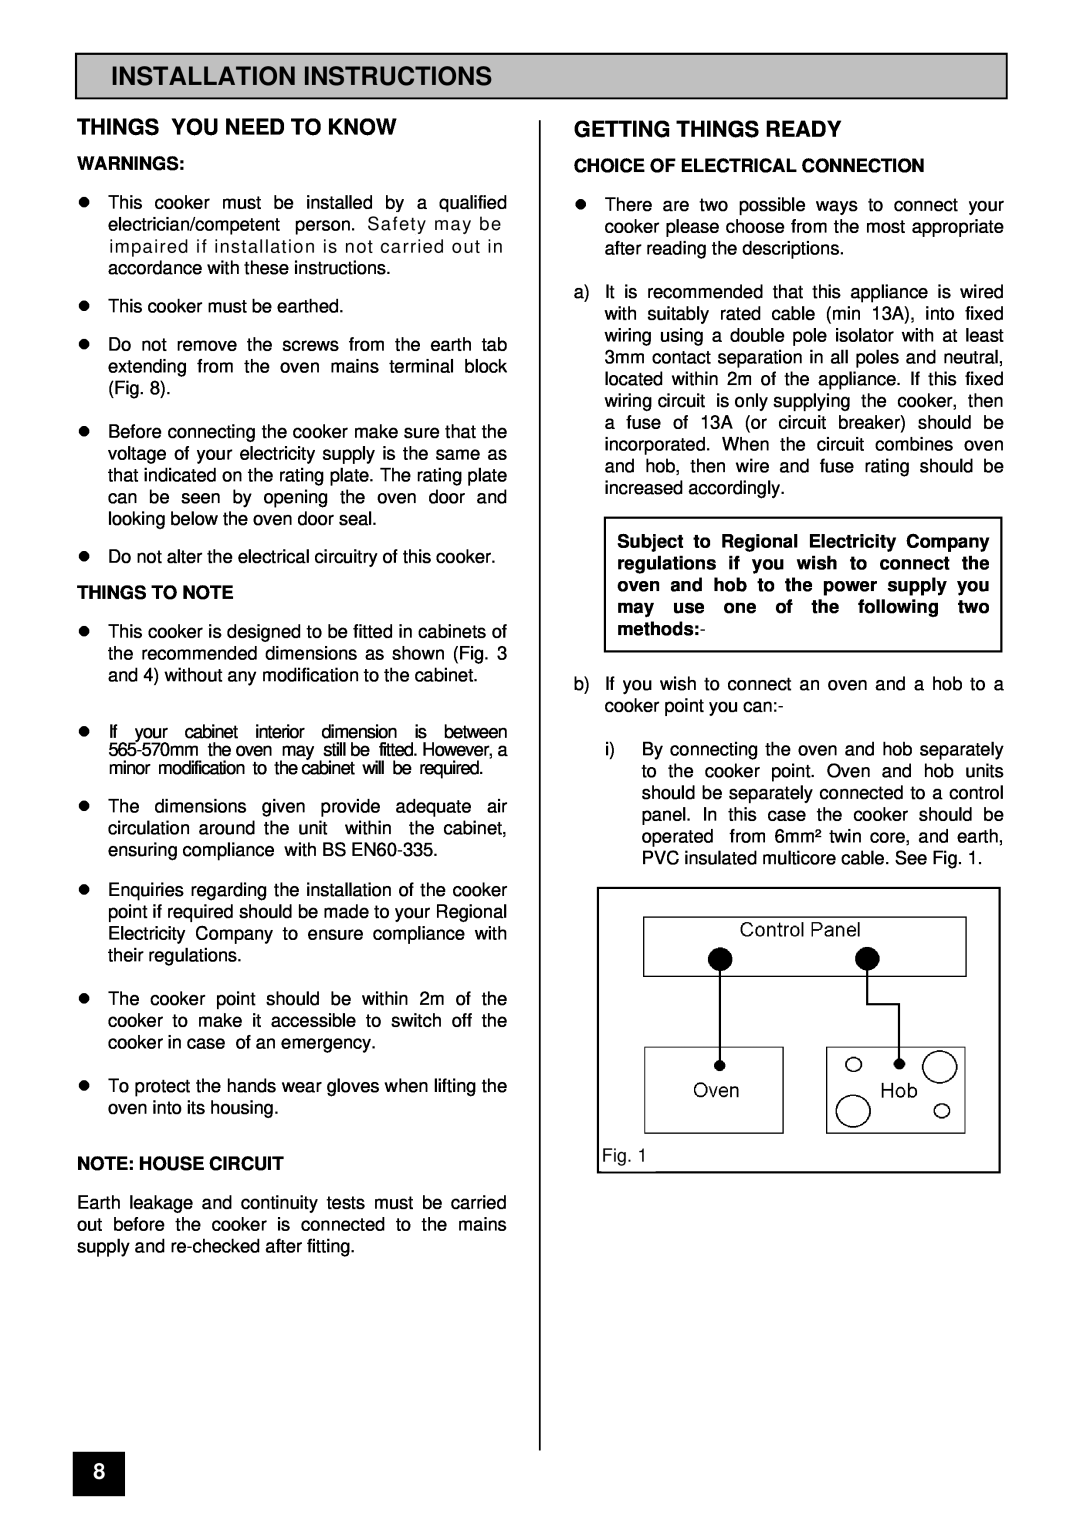 Tricity Bendix SOMERSET Installation Instructions, Things You Need To Know, Getting Things Ready, Warnings, Things To Note 